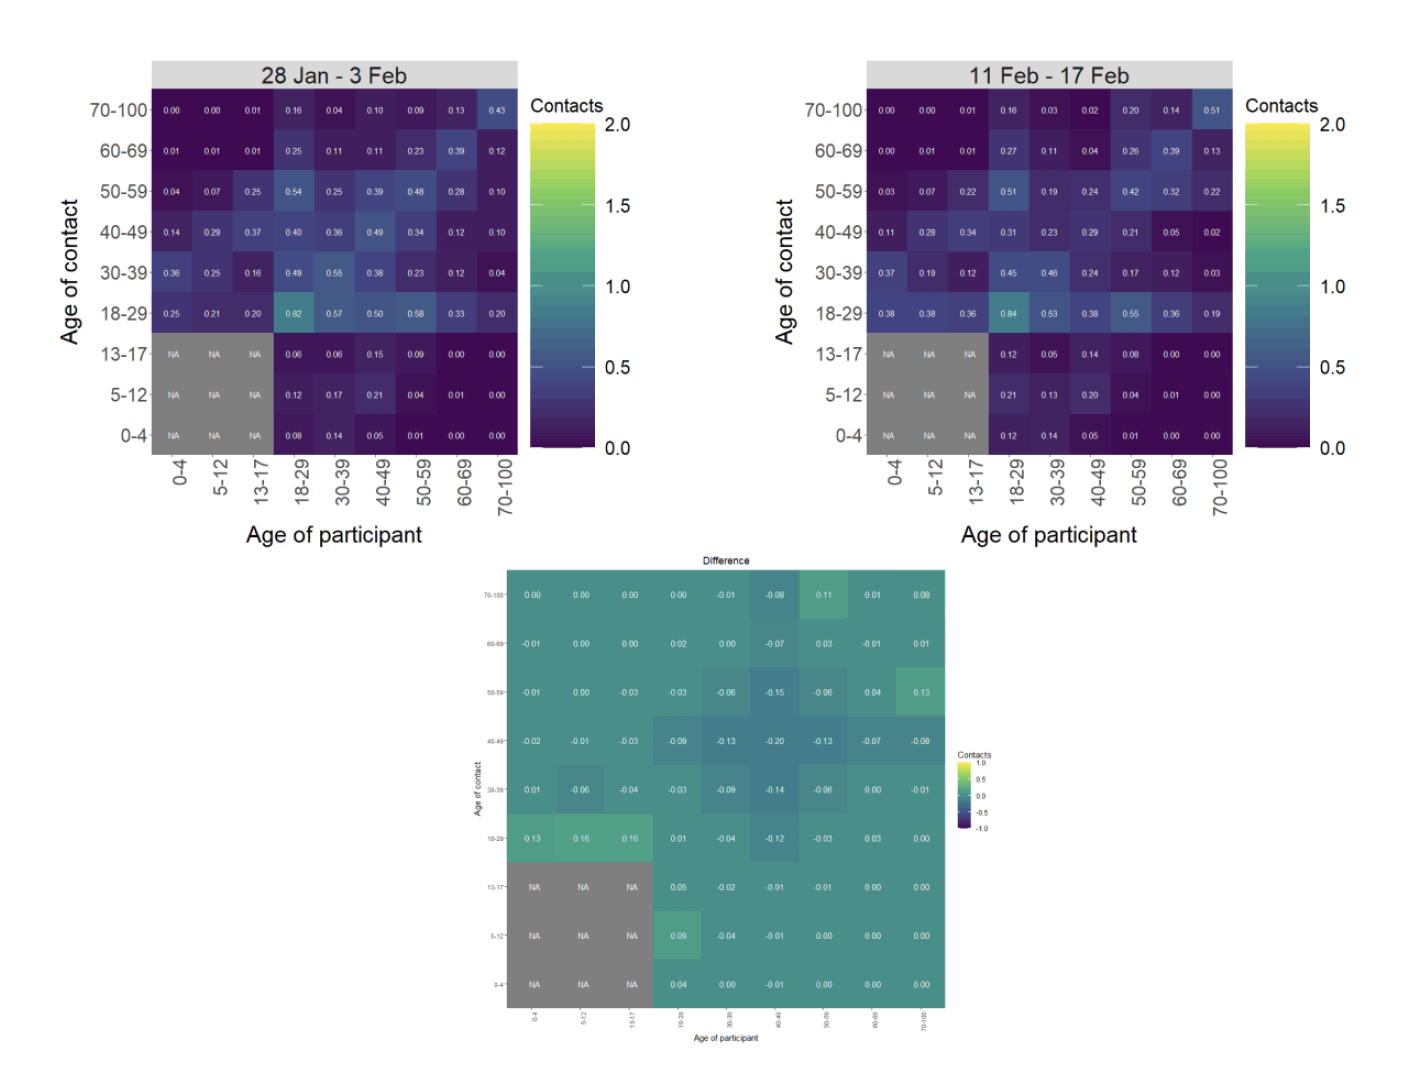 Heat maps showing the mean contacts by age group in the weeks of 21-27 Jan and 4-17 Feb.